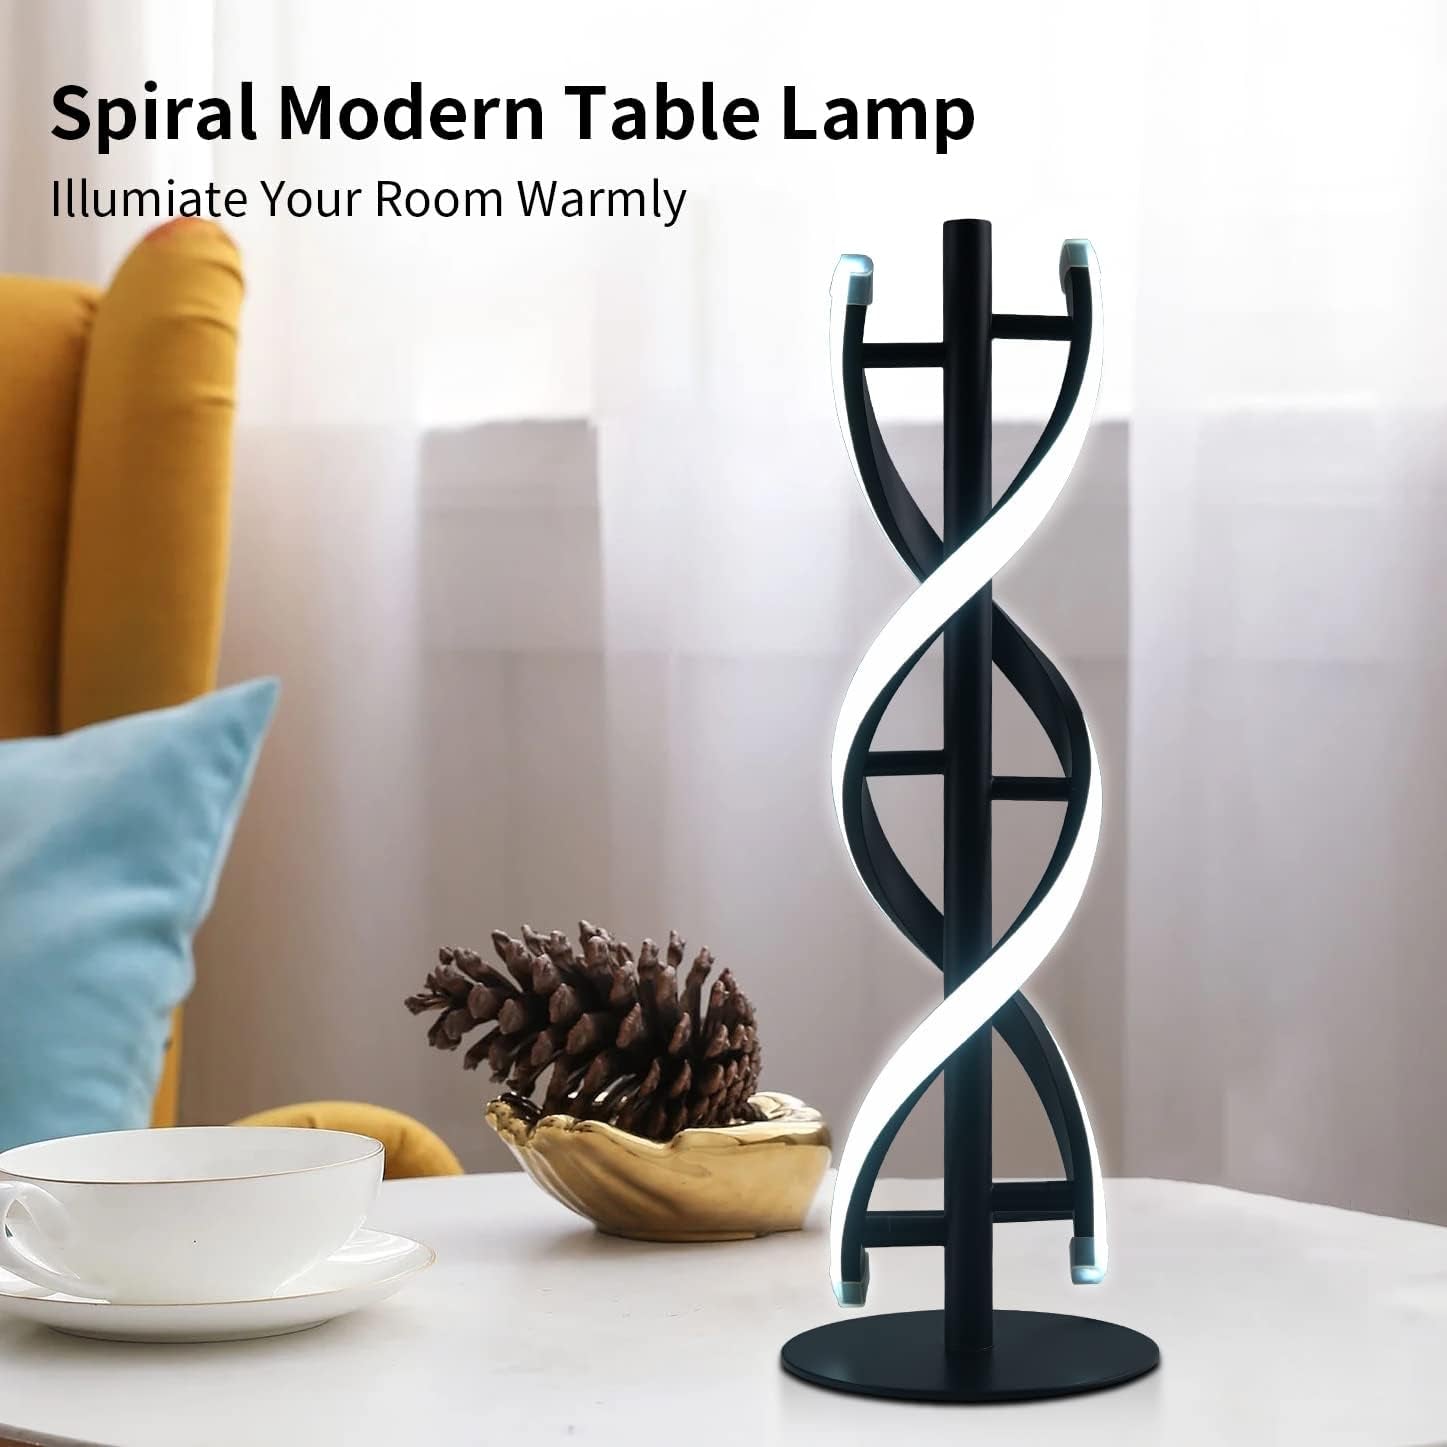 Double Spiral LED Table Lamp, Creative Double Helix Lampbody Matchs Metal Base, 12W Warm White Eye - Caring Dimmable LED Bedside Lamp Decorative Lighting - White - Open Market .Co - 